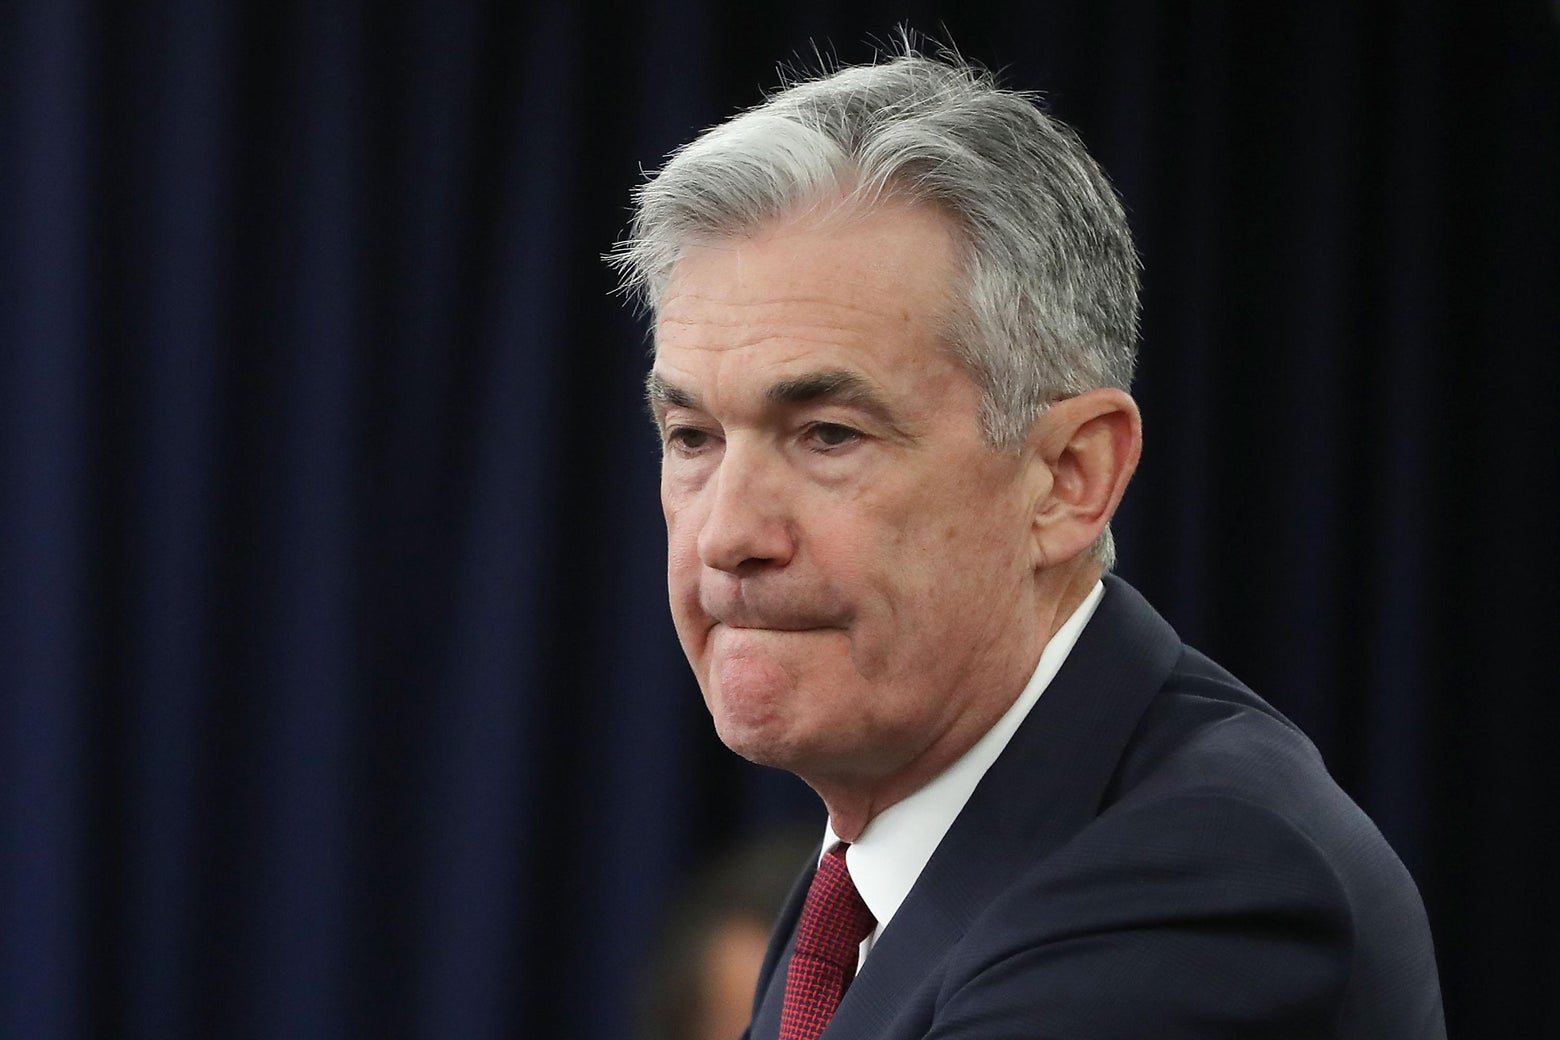 Donald Trump wants to fire Federal Reserve chair Jerome Powell. Can he?